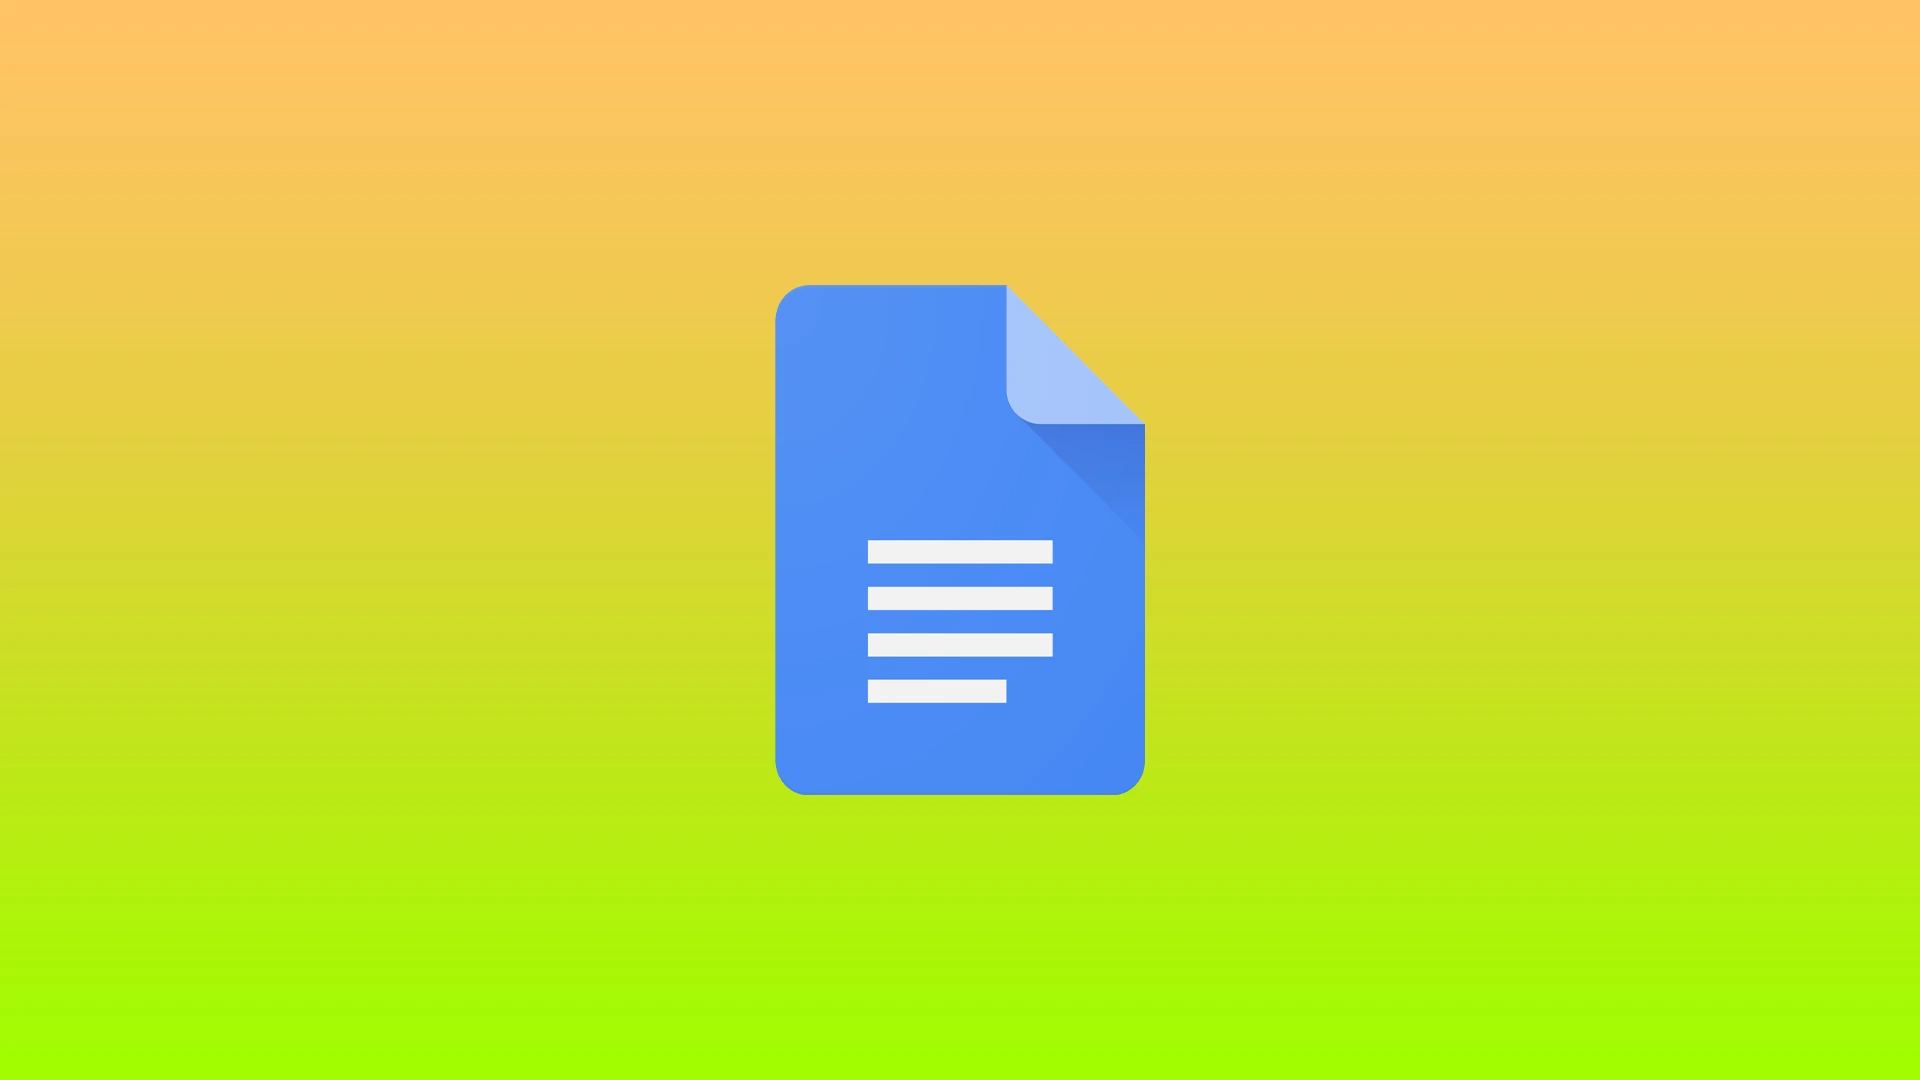 How to add watermark to Google Docs